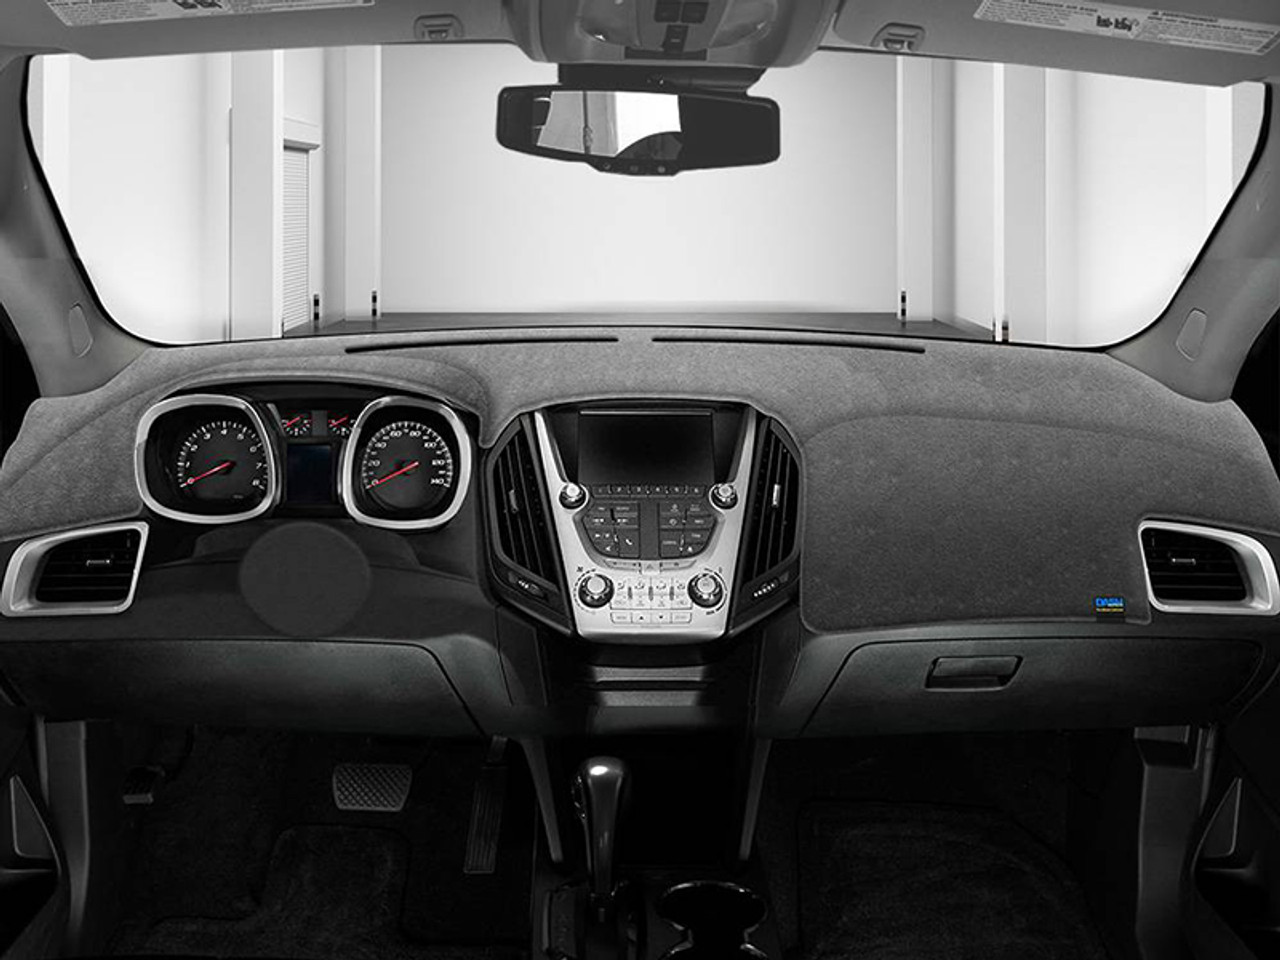 Brushed Suede Dash Cover Protect Your Dashboard